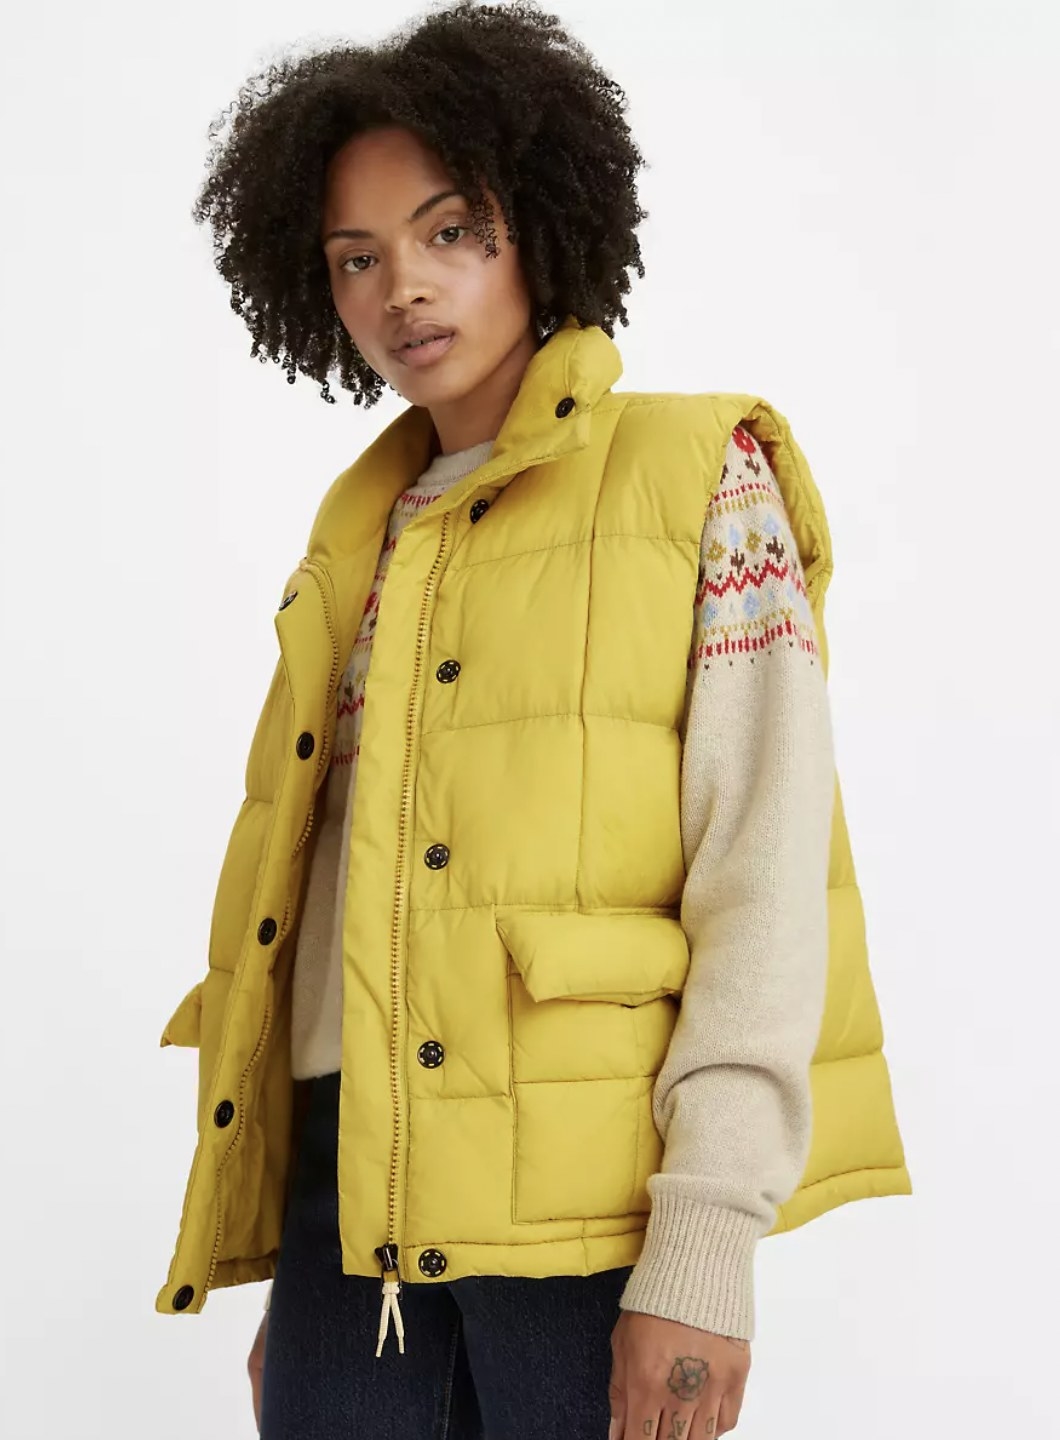 Model wearing the yellow vest over a sweater